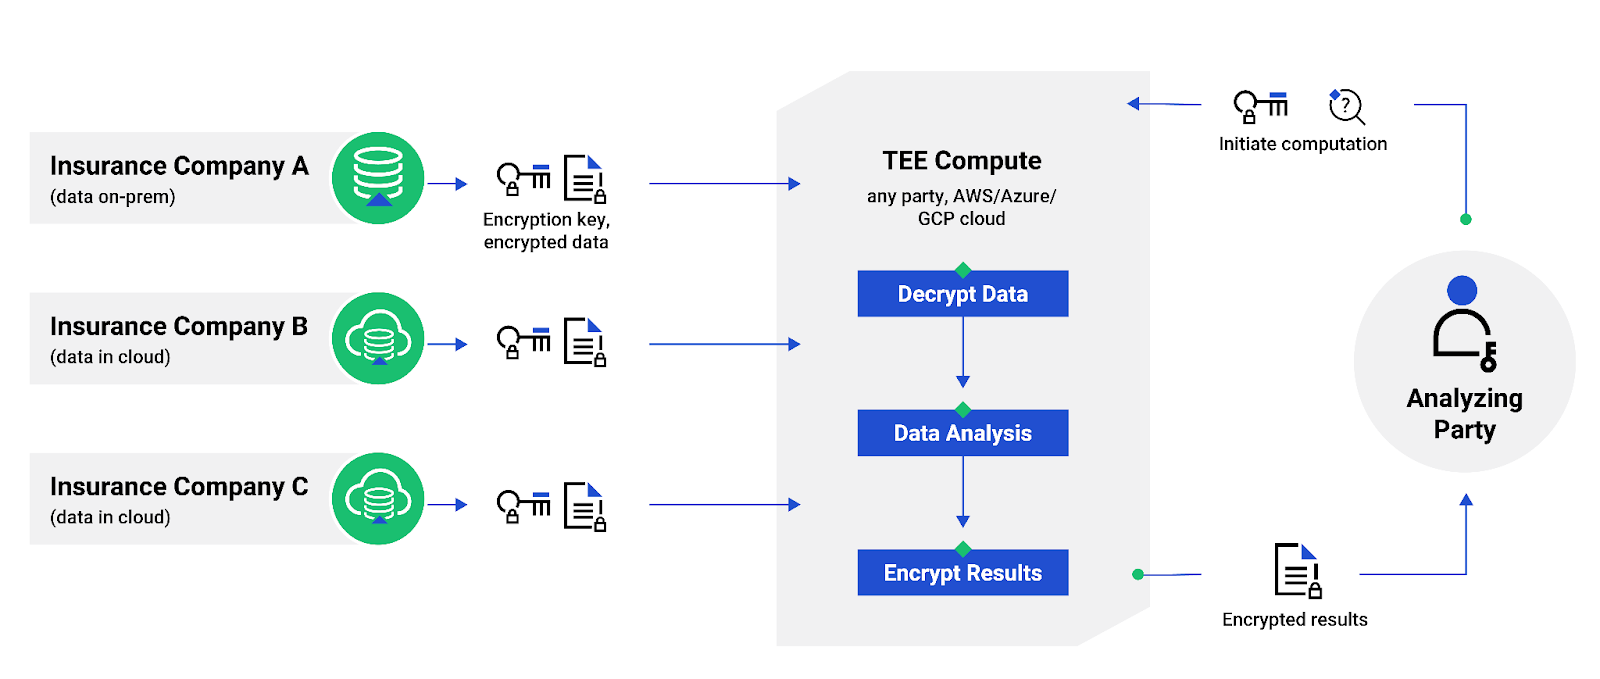 Shows how multiple data owners and a data analzyer can securely and privately collaborate in AI model development, training, personalization utilizing a TEE.